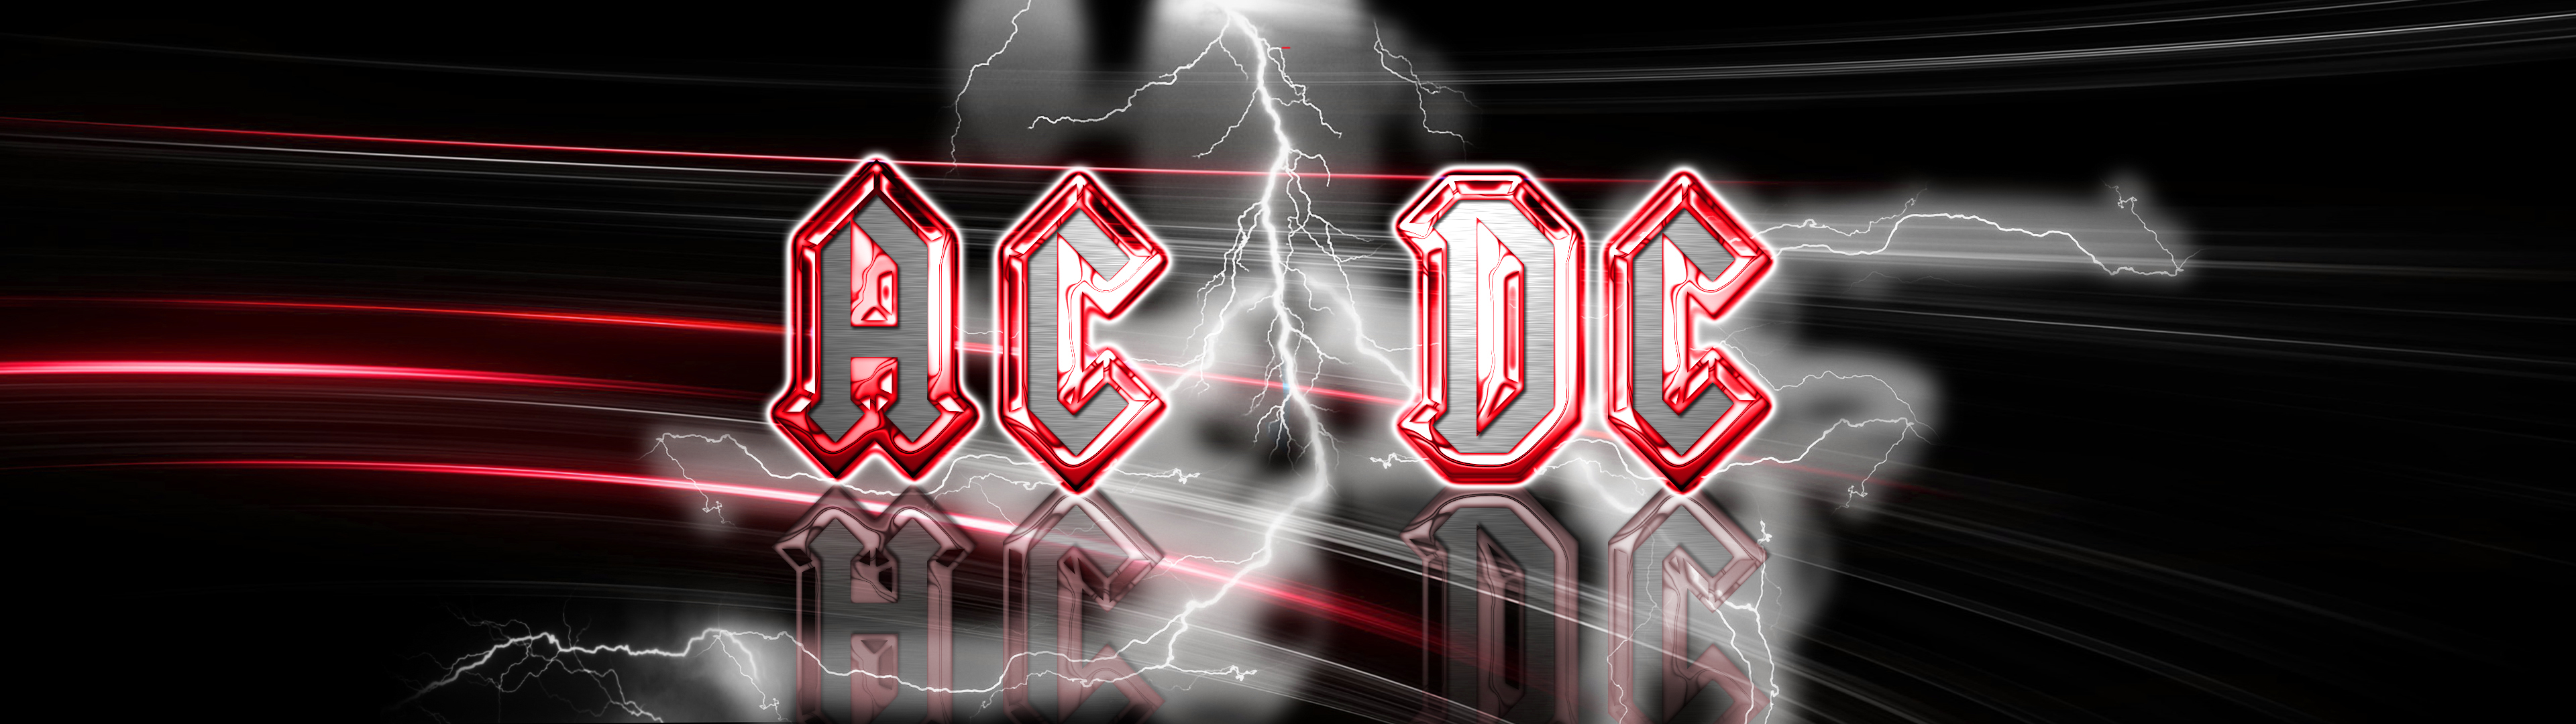 Ac Dc HD Wallpaper Background Image